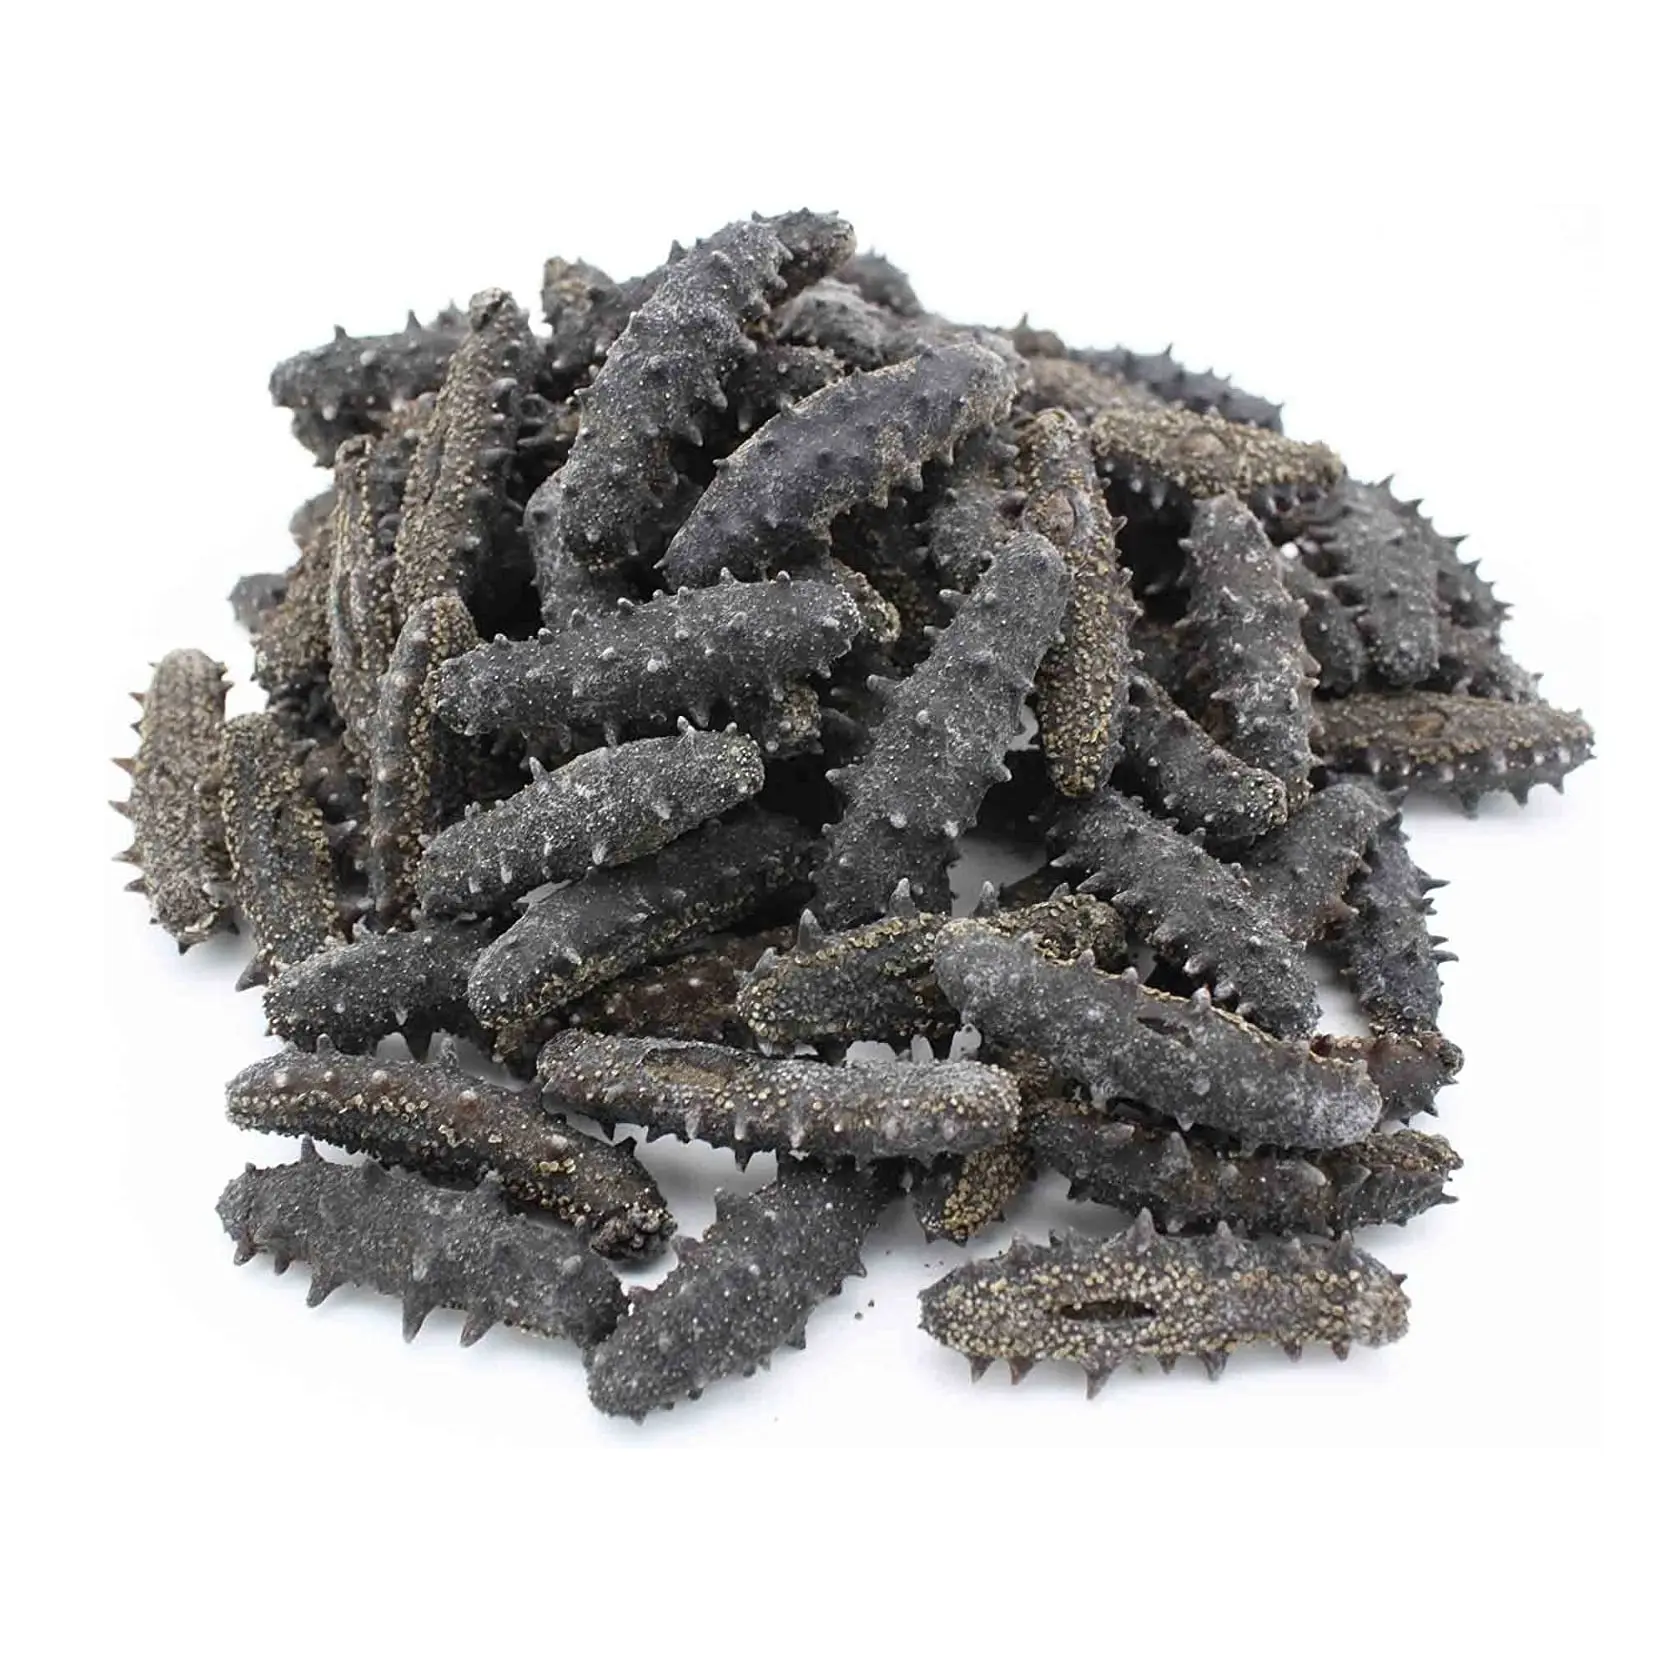 Factory Best Price Dried Sea Cucumber - DRIED SEAFOOD With Fast Delivery